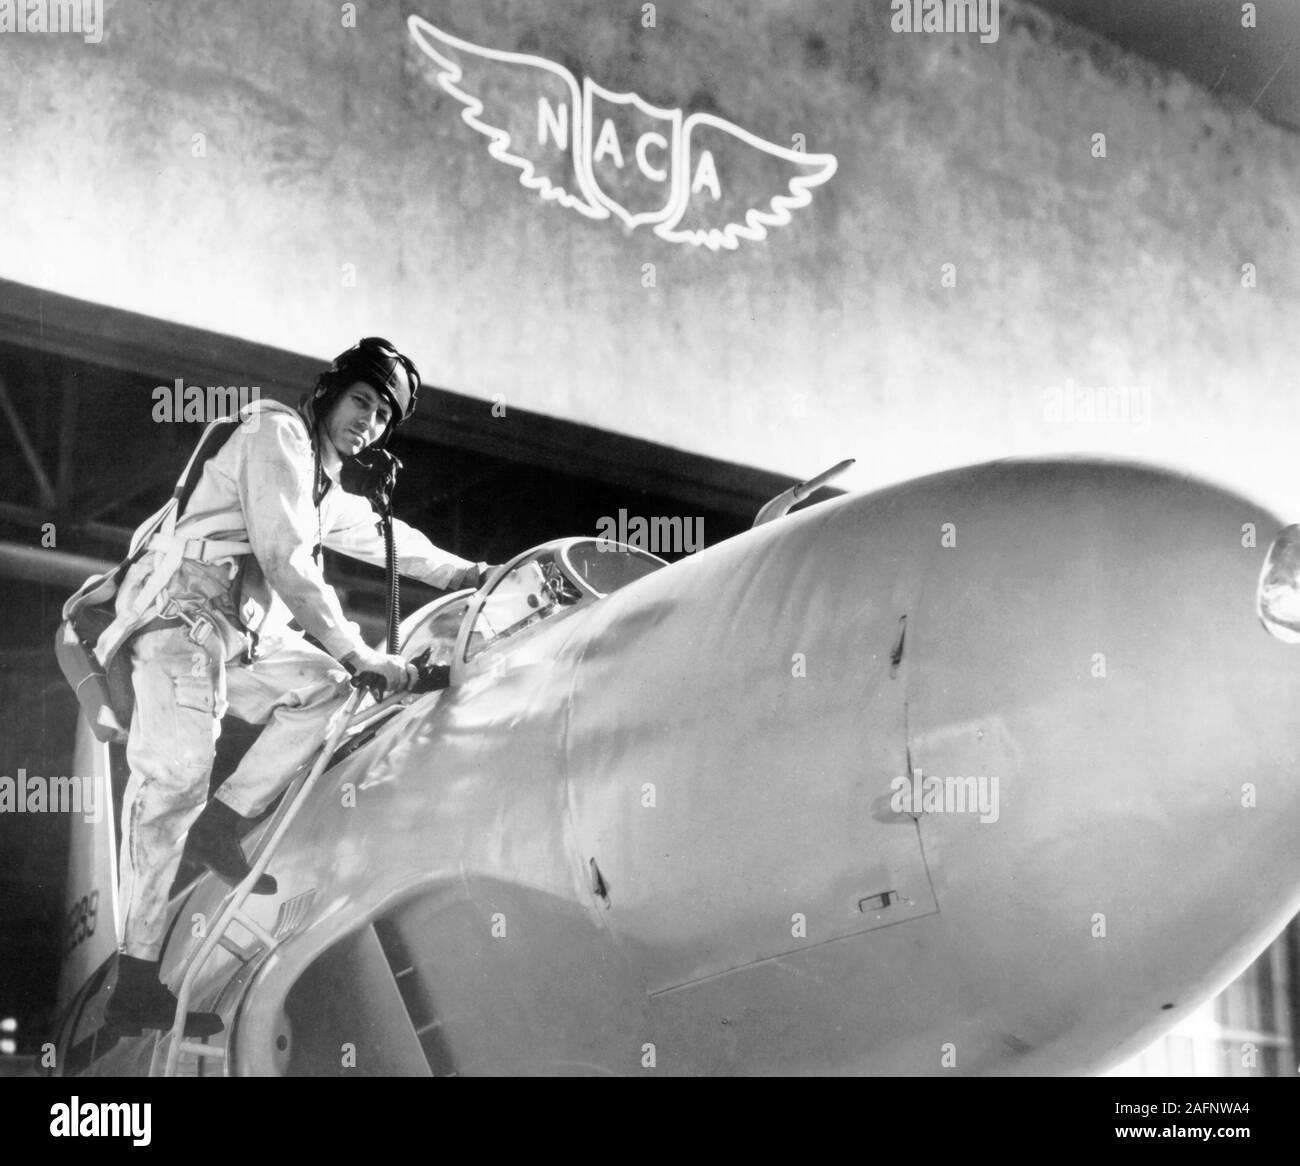 Test pilot Lawrence A. Clousing climbs into his Lockheed P-80 aircraft for a test flight at the Ames Aeronautical Laboratory Stock Photo